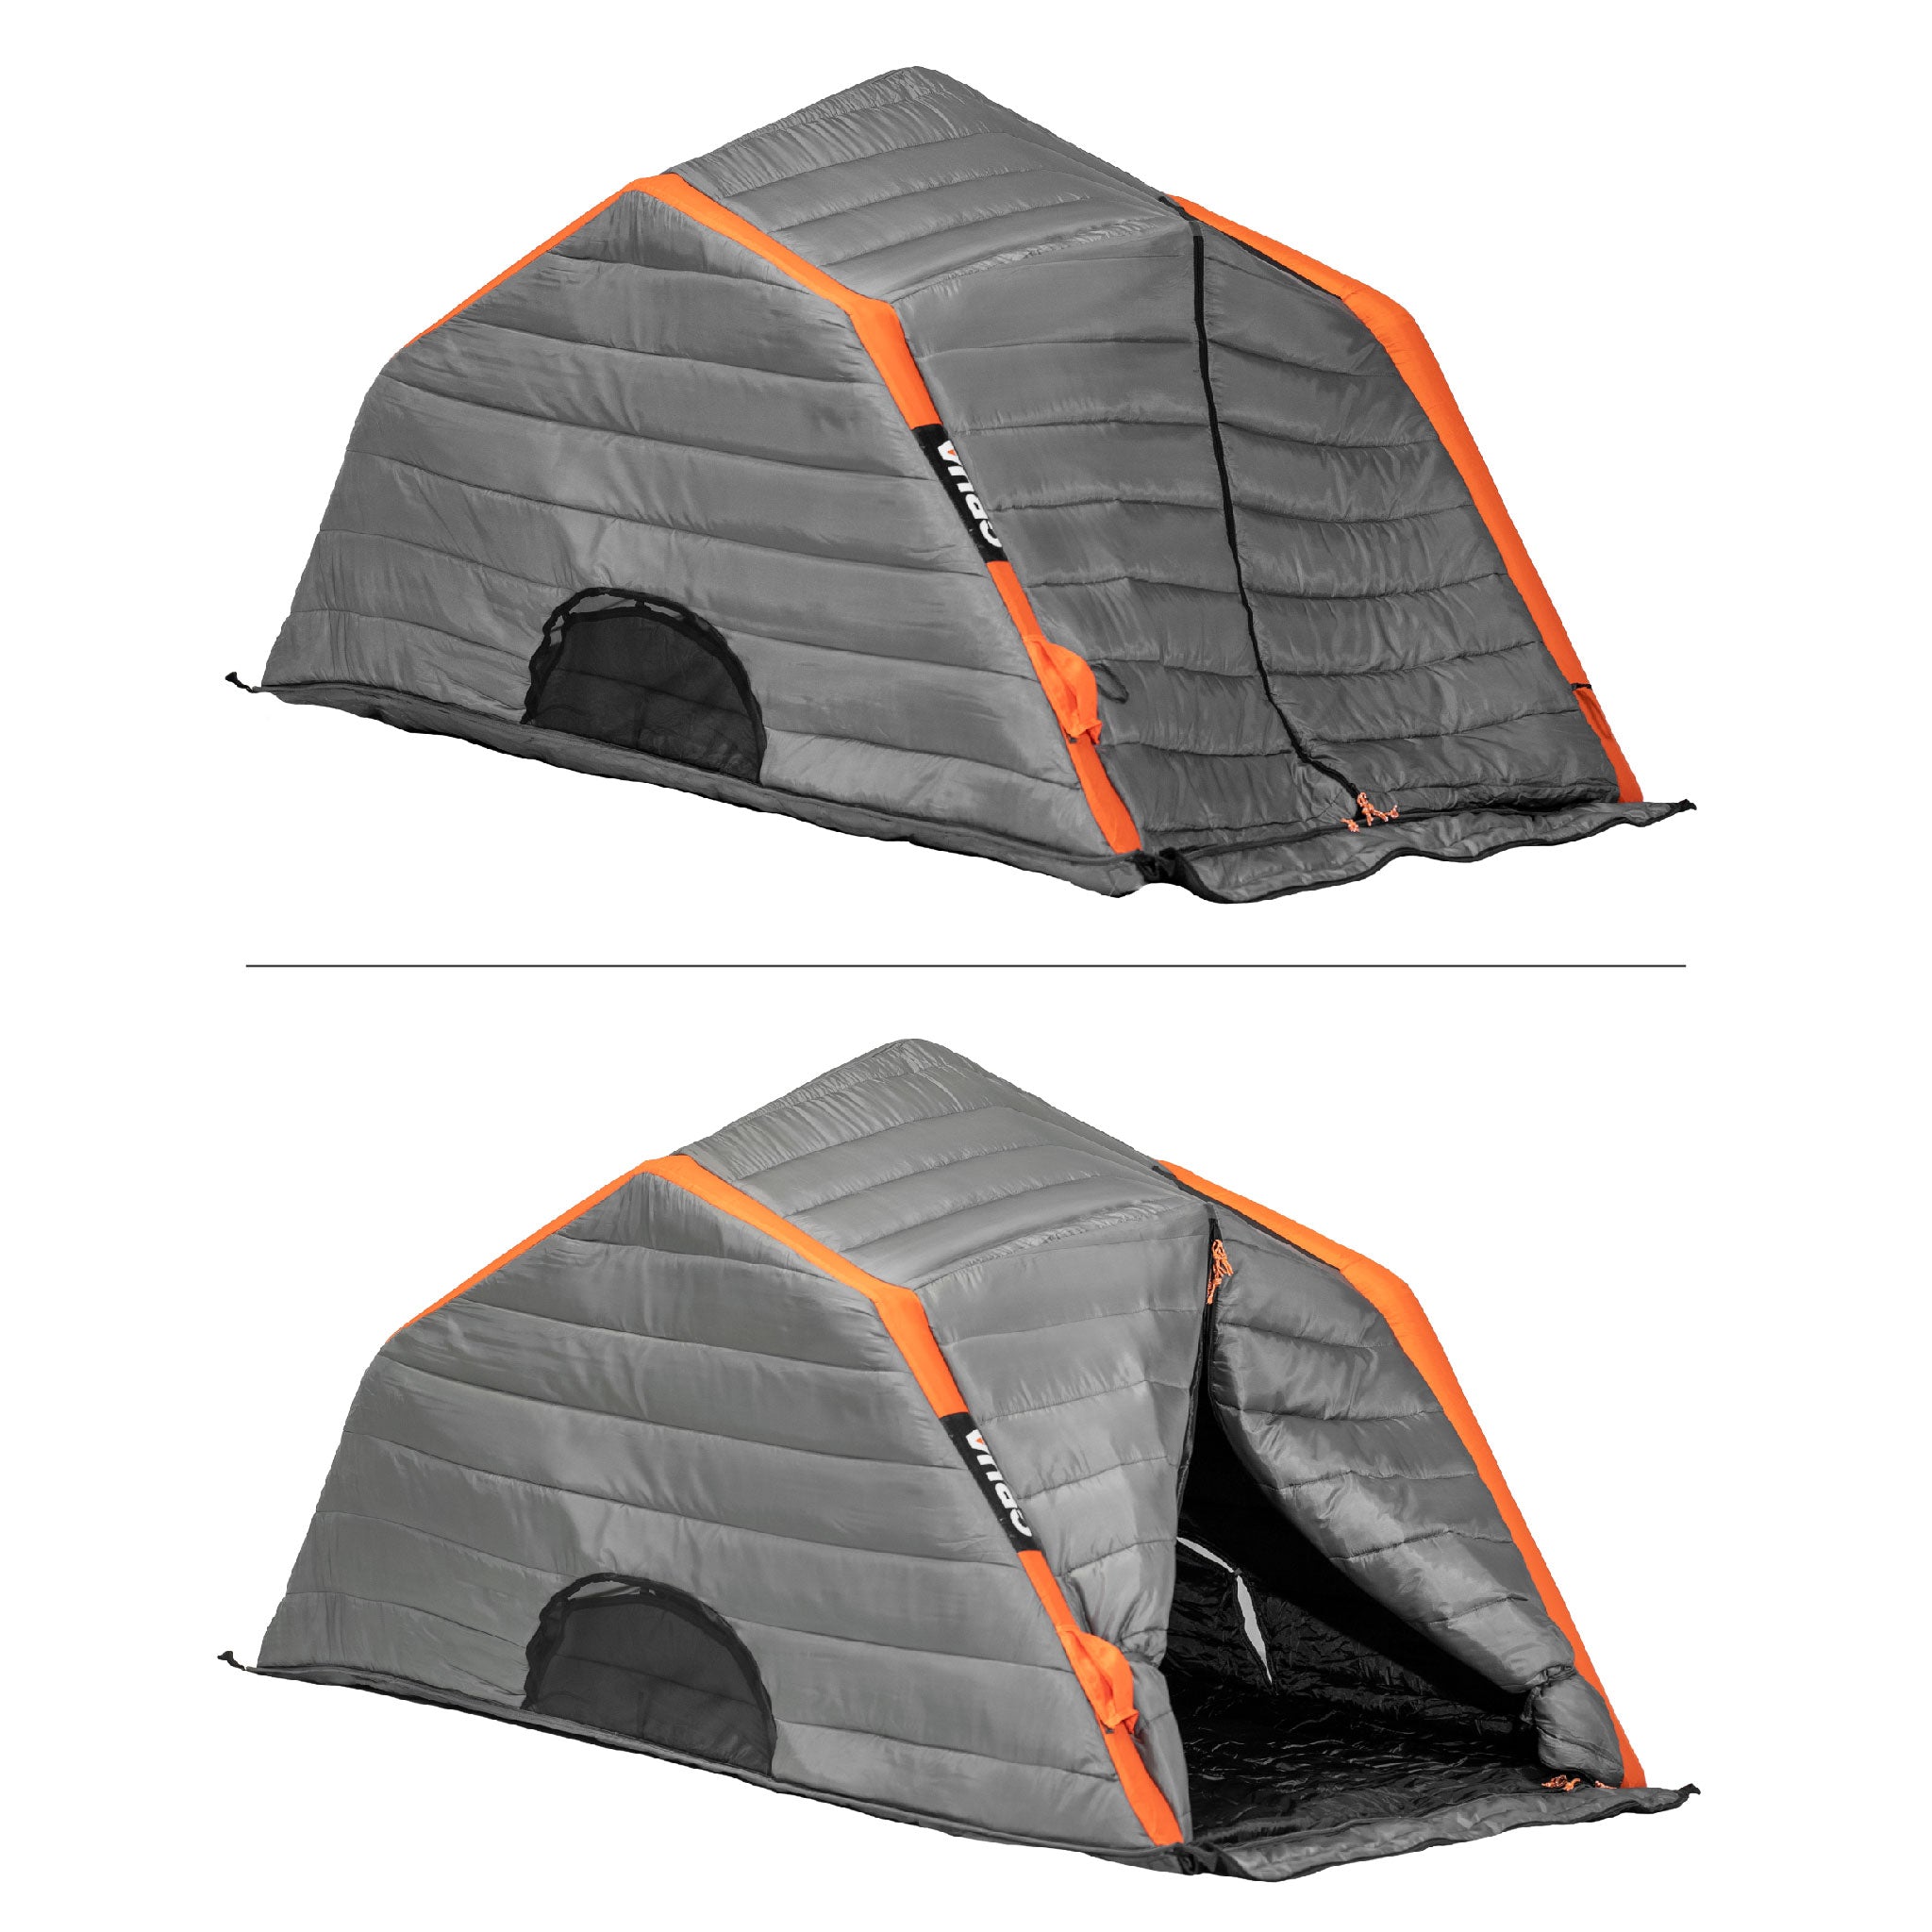 CULLA HAUL | 2 PERSON INSULATED INNER TENT WITH TEMPERATURE REGULATING, NOISE DAMPENING AND LIGHT BLOCKING FEATURES